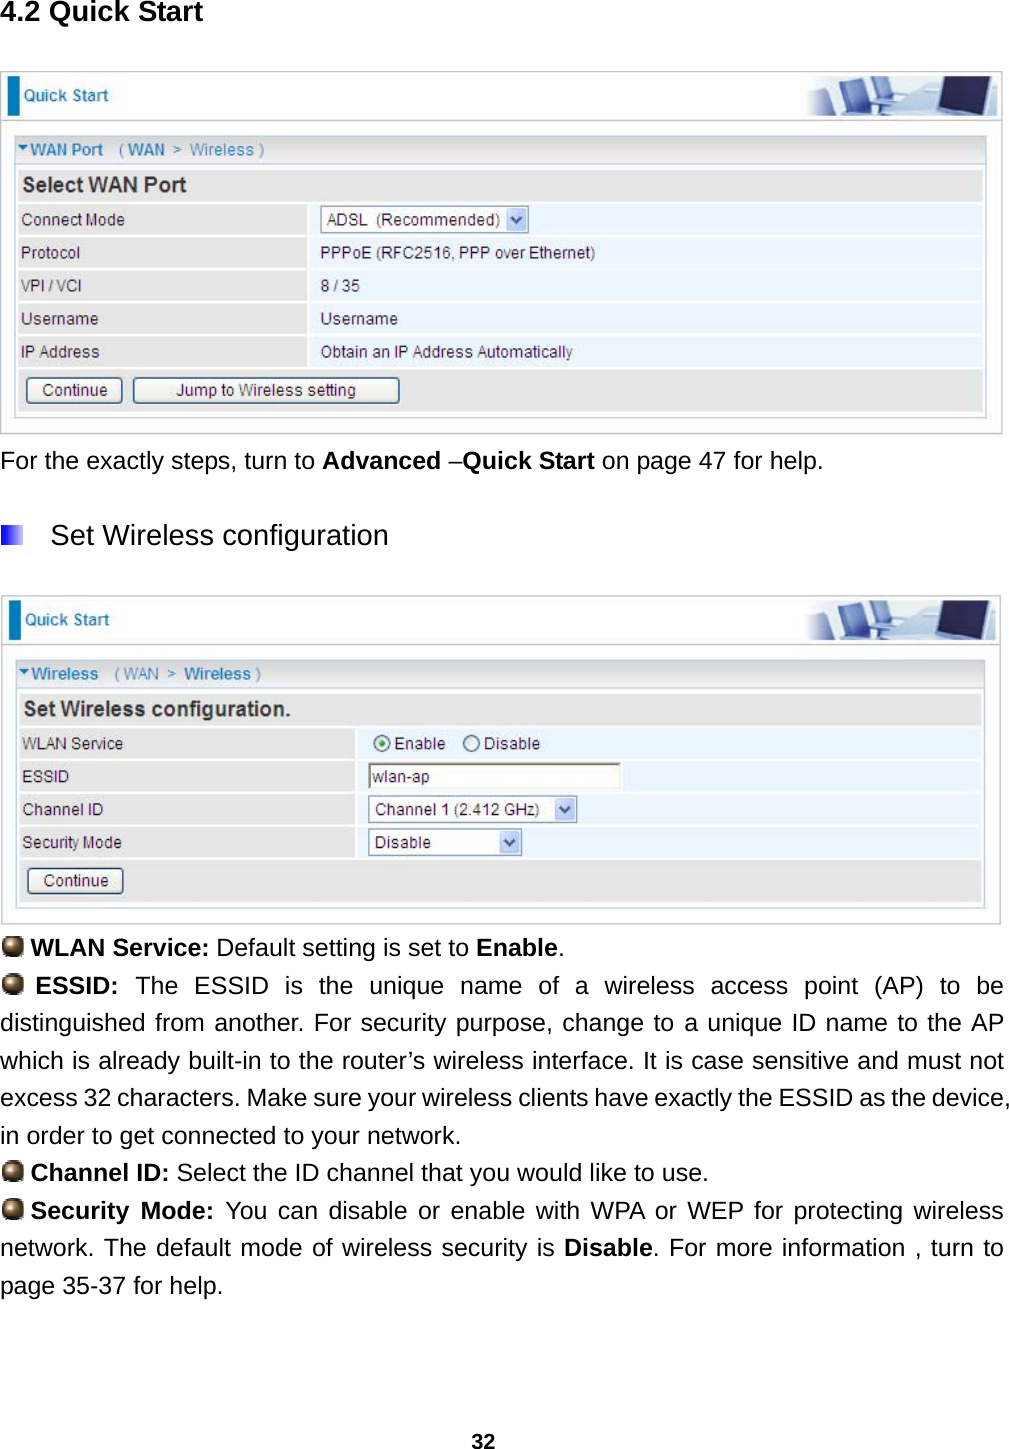 32 4.2 Quick Start  For the exactly steps, turn to Advanced –Quick Start on page 47 for help.    Set Wireless configuration    WLAN Service: Default setting is set to Enable.   ESSID:  The ESSID is the unique name of a wireless access point (AP) to be distinguished from another. For security purpose, change to a unique ID name to the AP which is already built-in to the router’s wireless interface. It is case sensitive and must not excess 32 characters. Make sure your wireless clients have exactly the ESSID as the device, in order to get connected to your network.  Channel ID: Select the ID channel that you would like to use.  Security  Mode: You can disable or enable with WPA or WEP for protecting wireless network. The default mode of wireless security is Disable. For more information , turn to page 35-37 for help. 